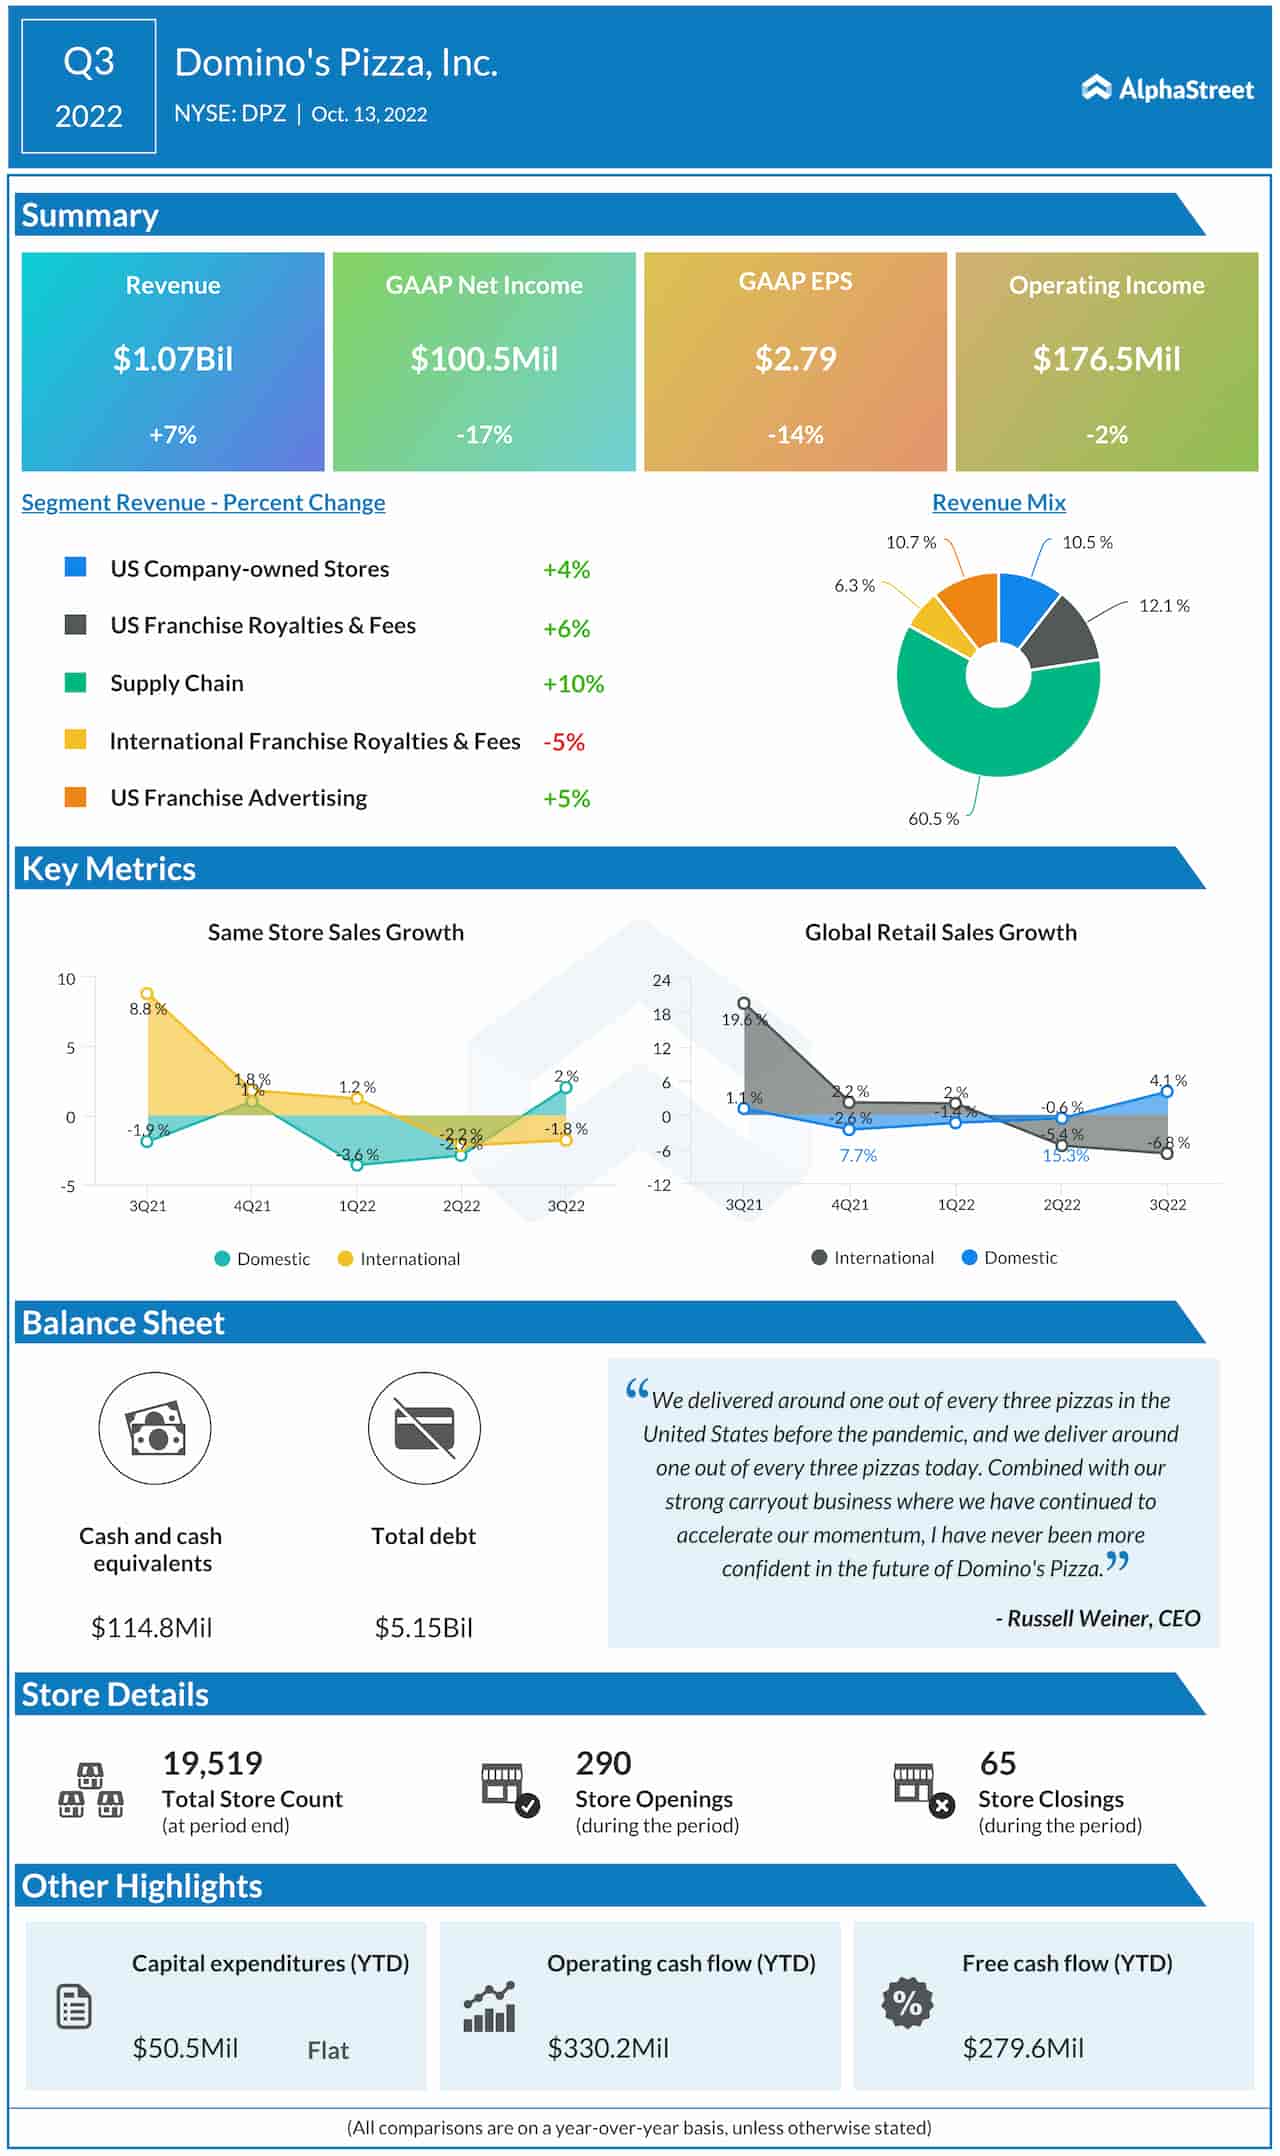 Infographic: Highlights of Domino’s Pizza (DPZ) Q3 2022 earnings